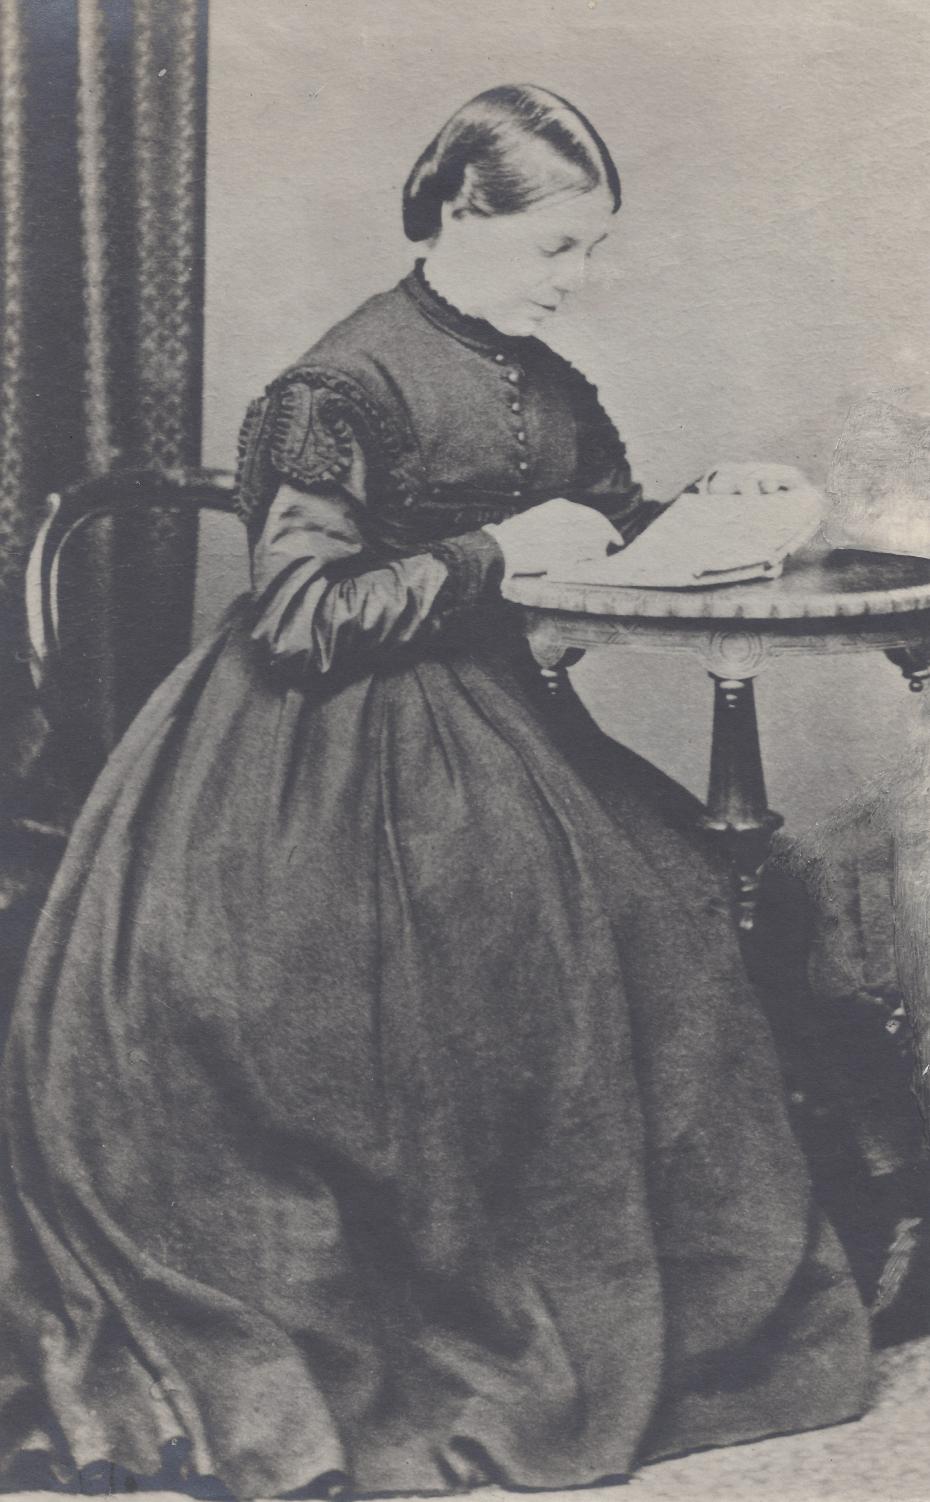 Possibly a photograph of Anne Austin by an unknown photographer, circa 1870 (archive reference: GCPH 5/3/1)